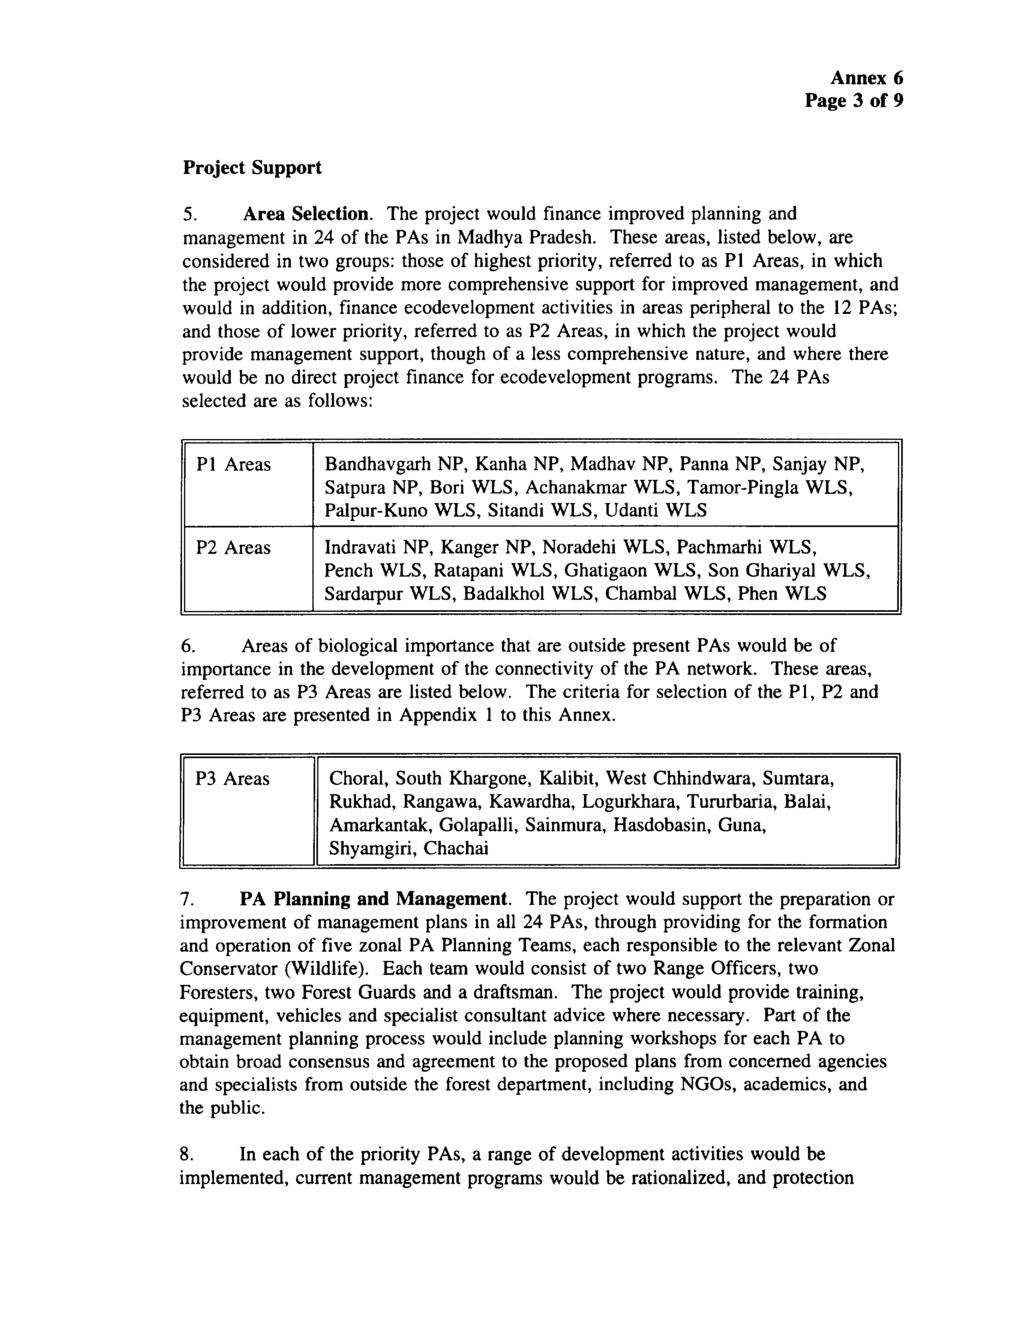 Annex 6 Page 3 of 9 Project Support 5. Area Selection. The project would finance improved planning and management in 24 of the PAs in Madhya Pradesh.